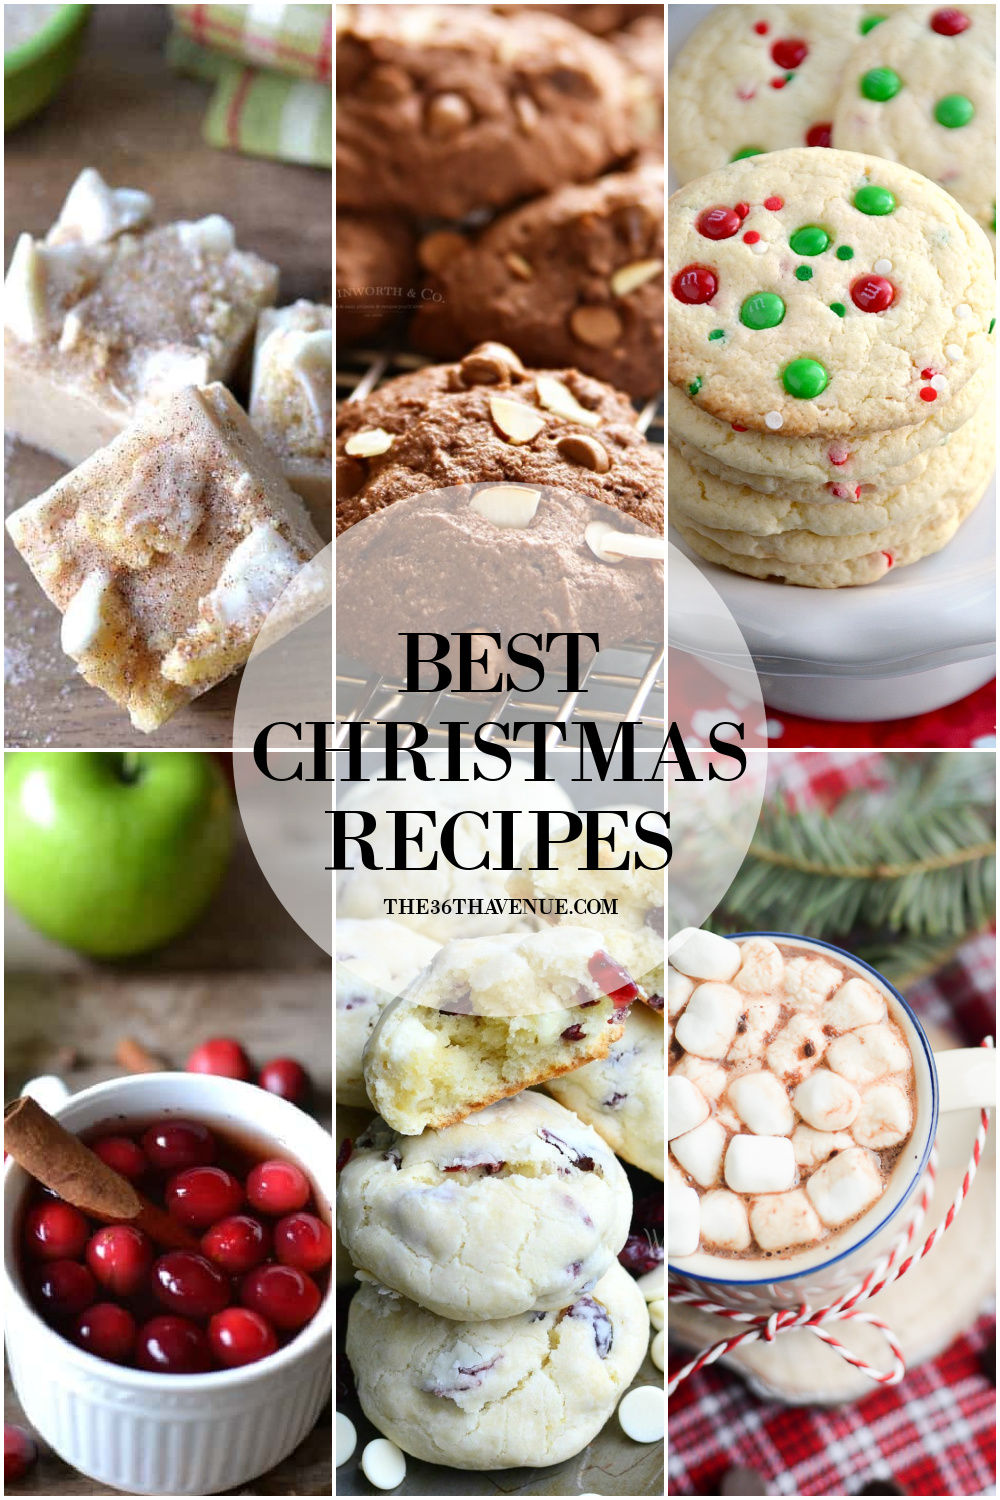 BEST CHRISTMAS RECIPES | The 36th AVENUE